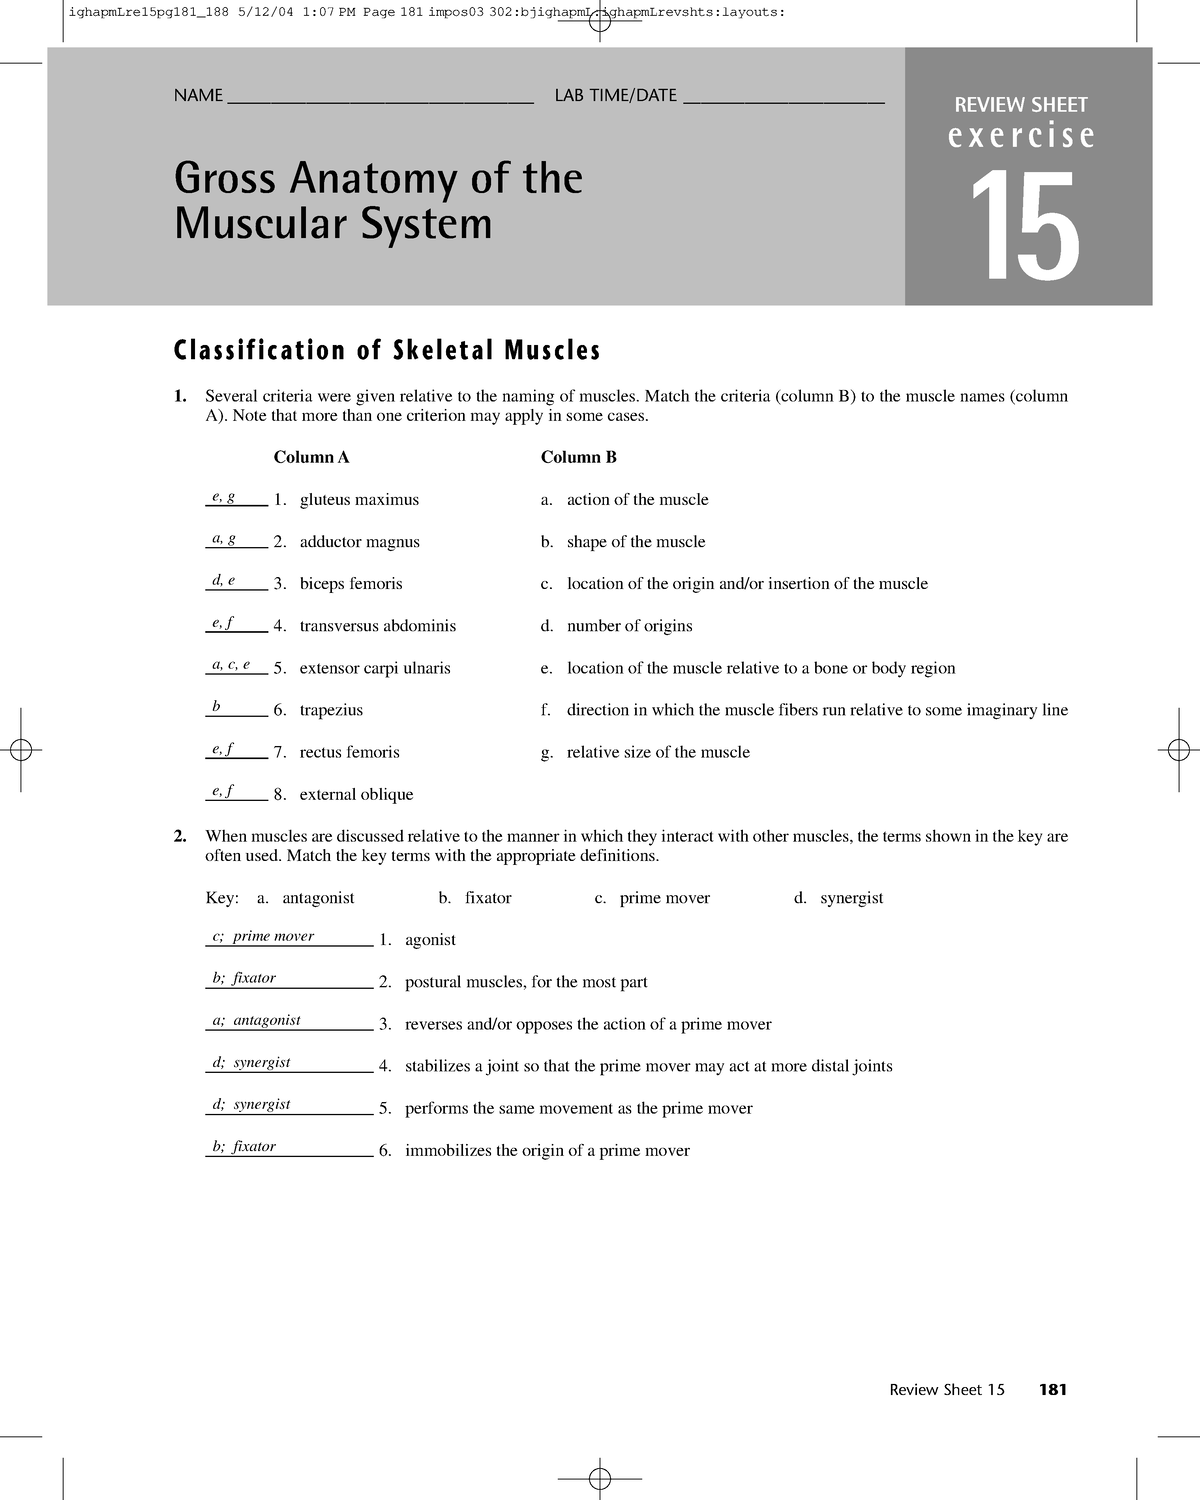 Gross Anatomy Of The Muscular System Review Sheet E X E R C I S E 15 Gross Anatomy Of The 0647